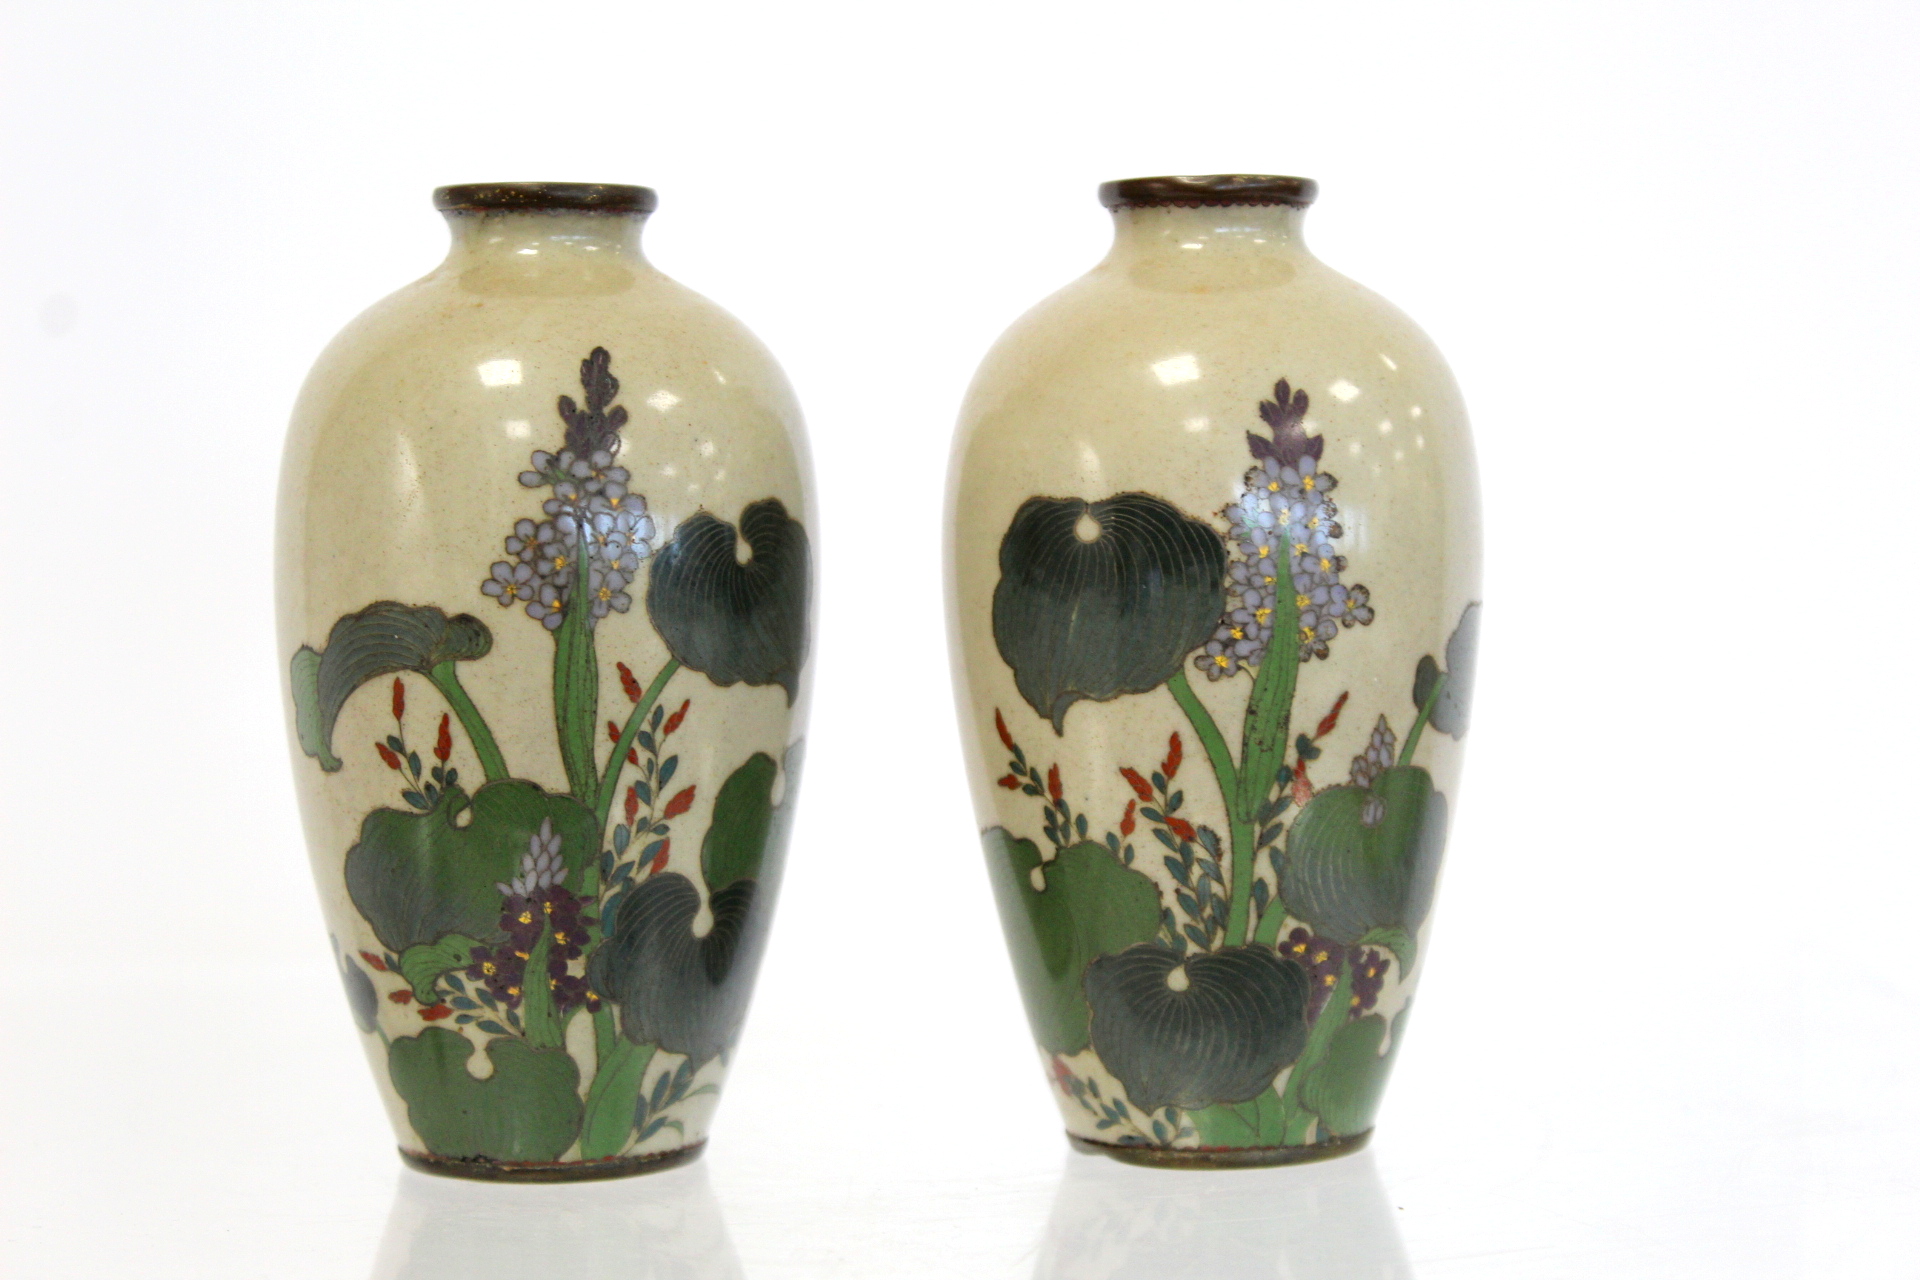 Pair of small Japanese Meiji period cloisonné vases with polychrome enamel decoration highlighted - Image 2 of 20